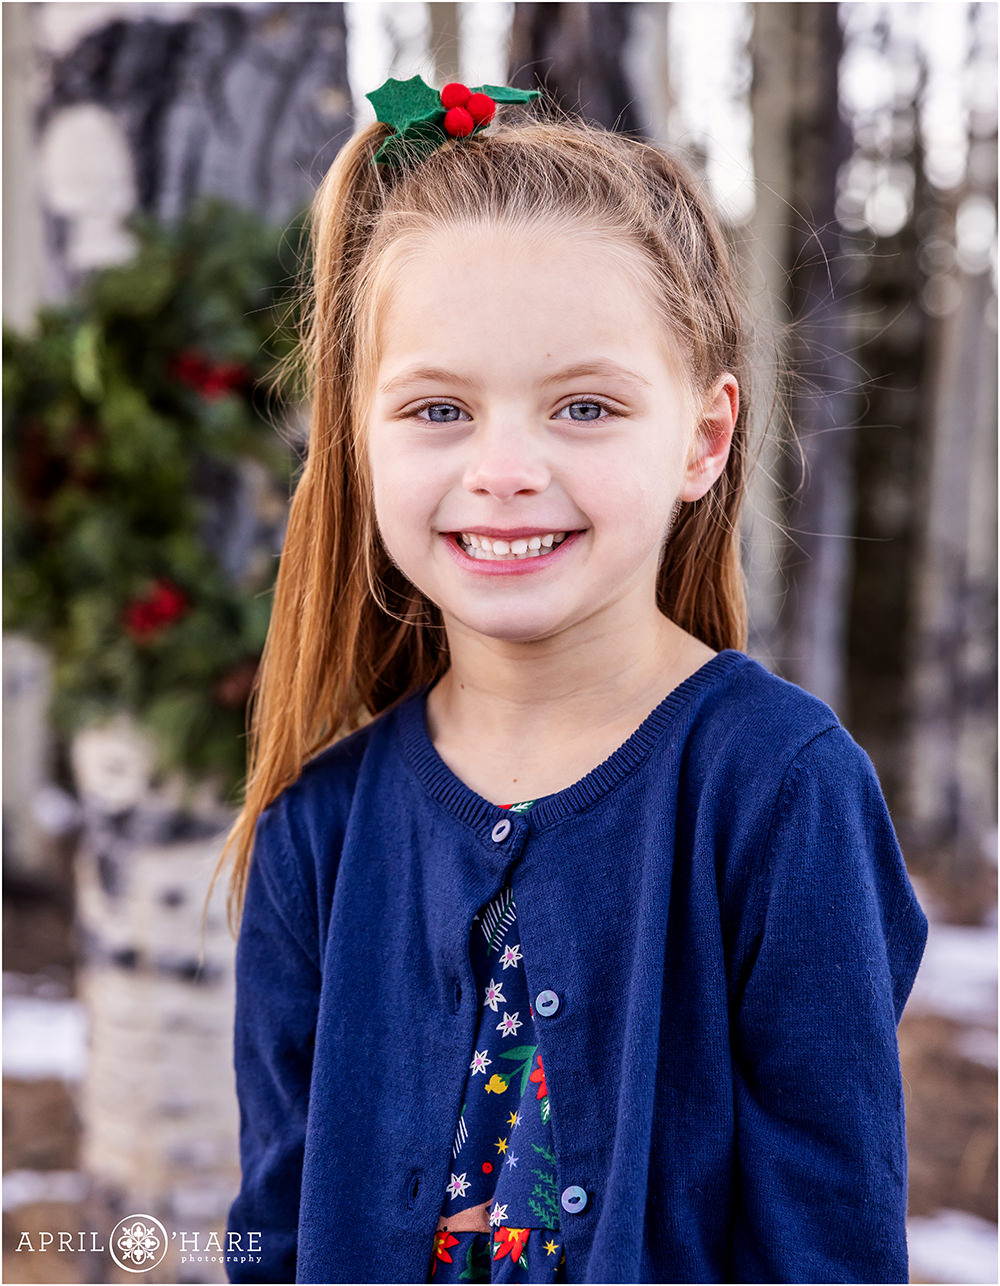 Sweet 5 year old girl Christmas portrait with a wreath hanging on an aspen tree behind her in Colorado